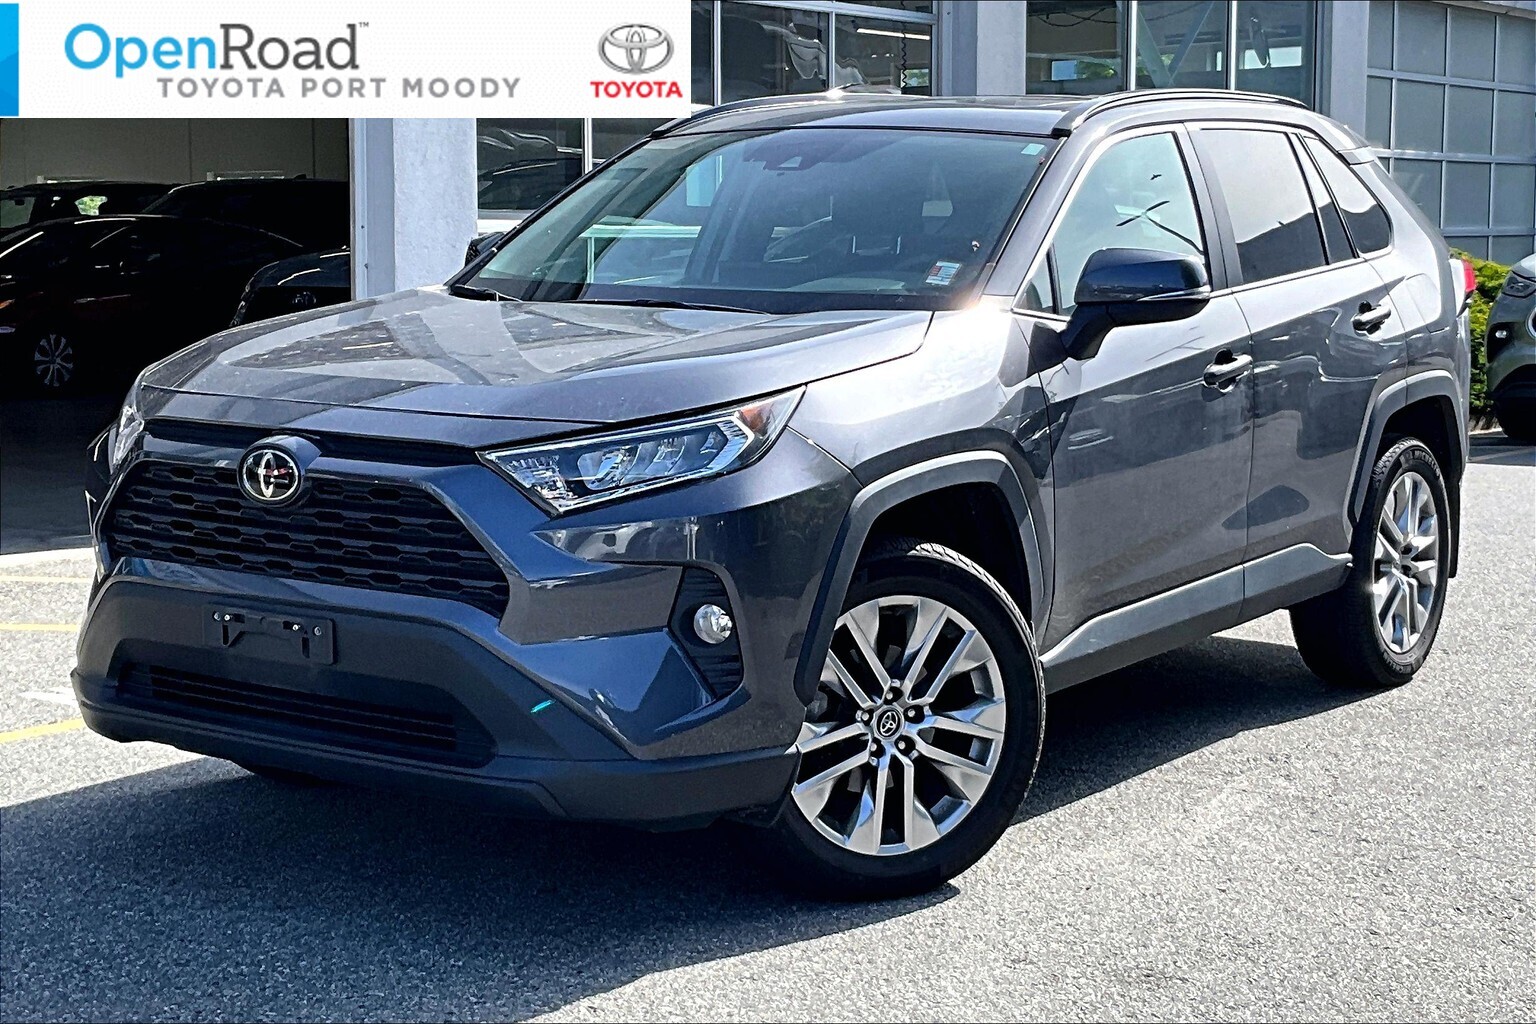 2019 Toyota RAV4 AWD XLE |OpenRoad True Price |Local |One Owner |No